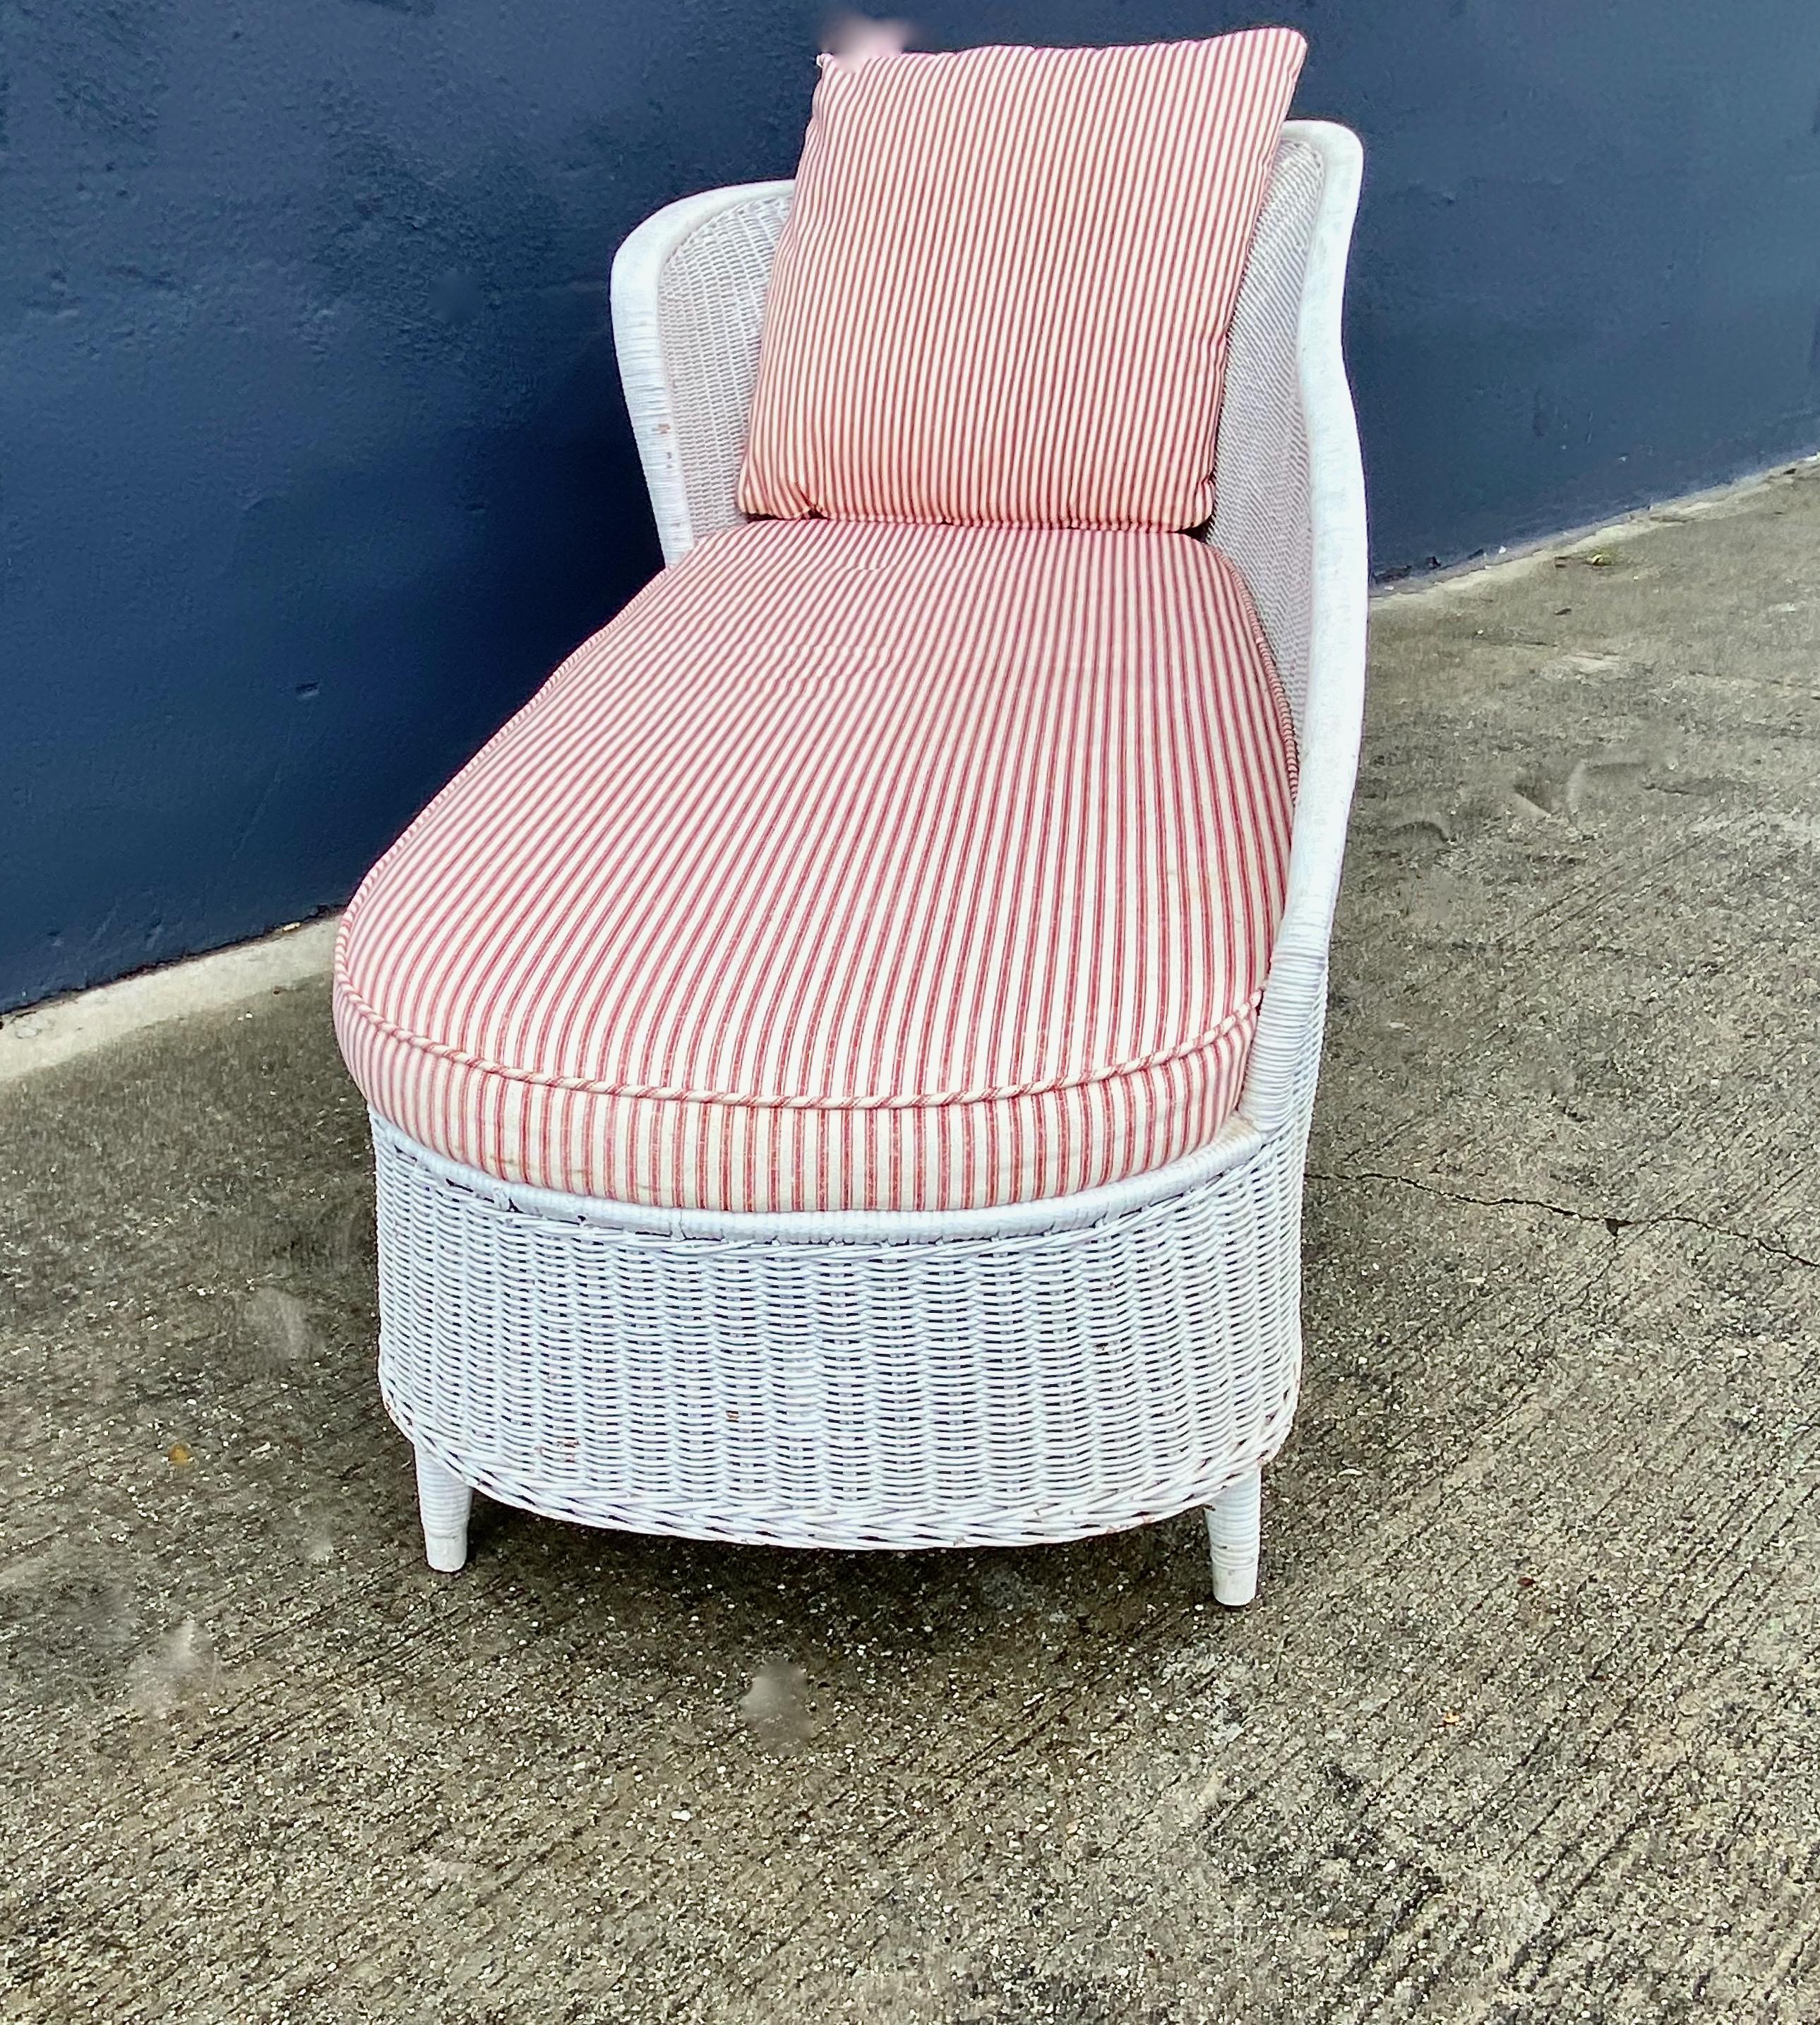 Upholstery Antique Wicker Chaise Longue or Daaybed For Sale